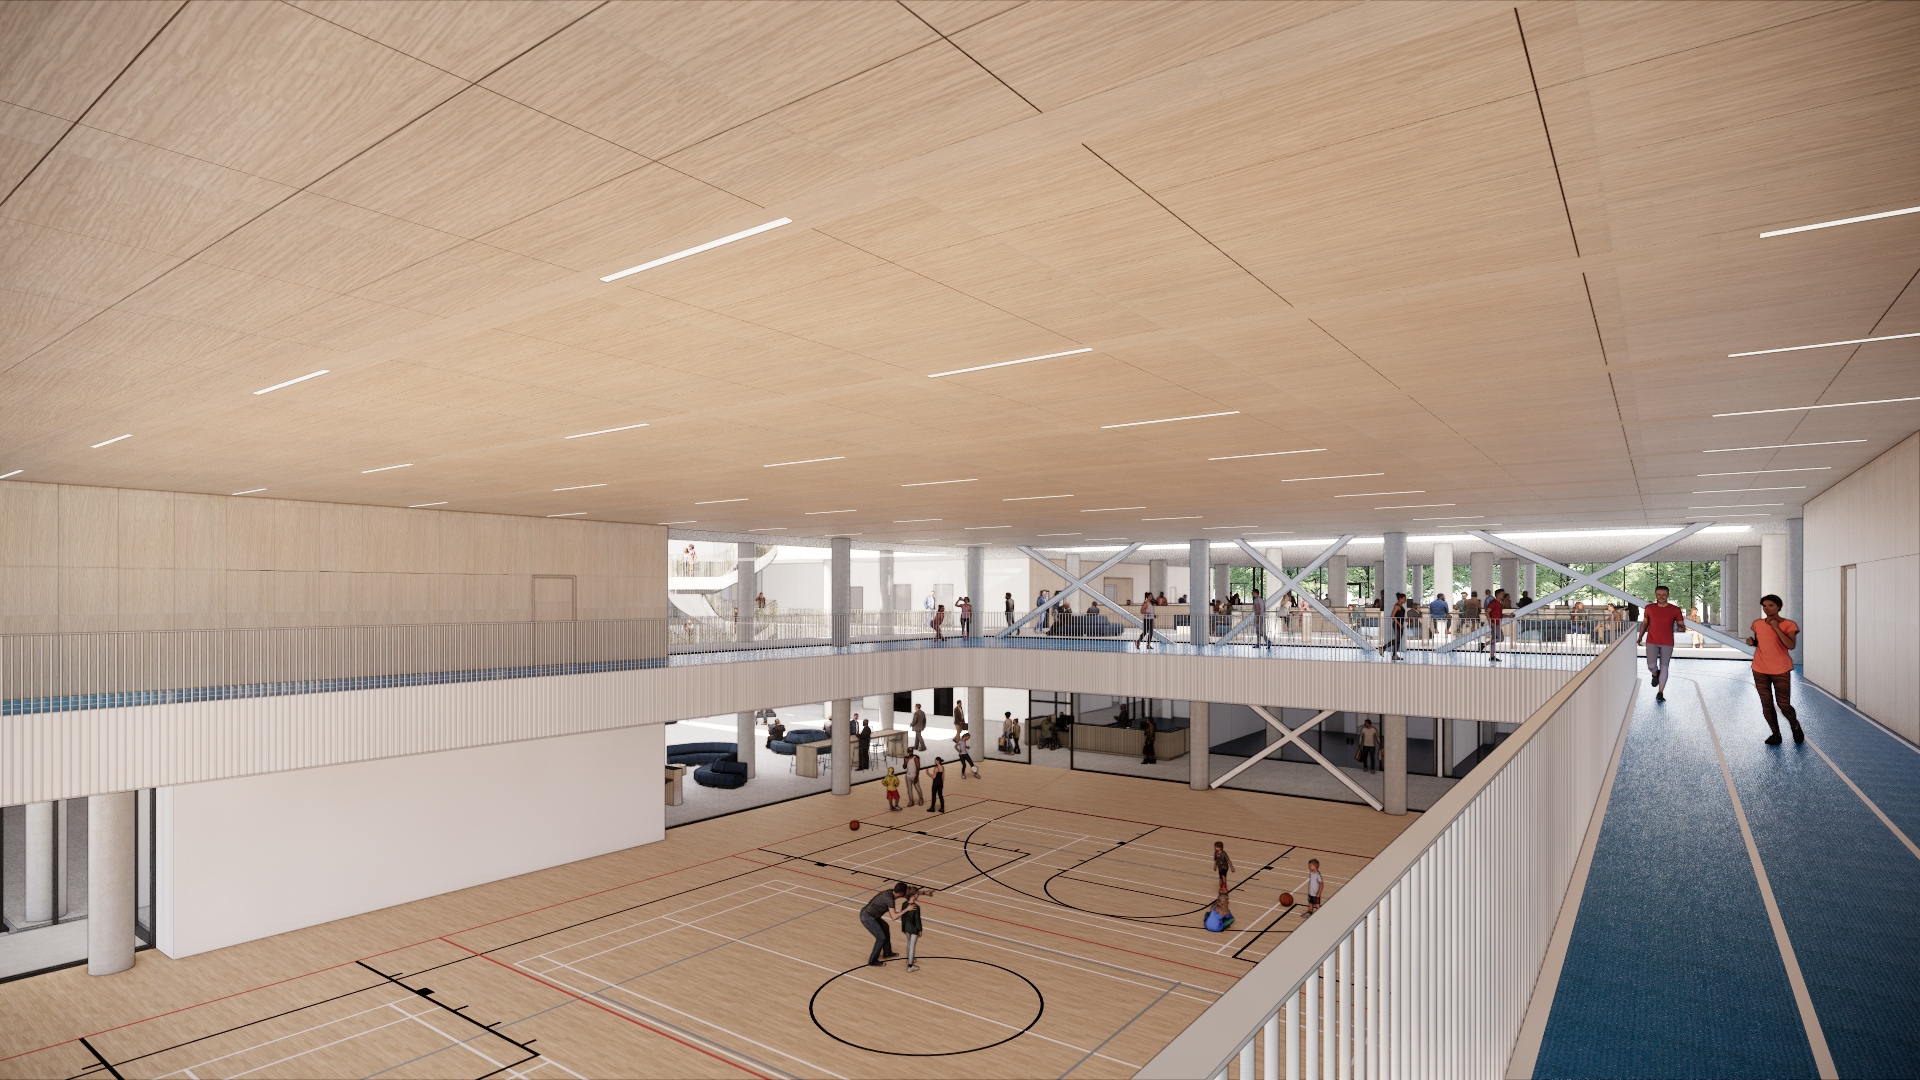 Rendering view of the recreation area in the Etobicoke Civic Centre